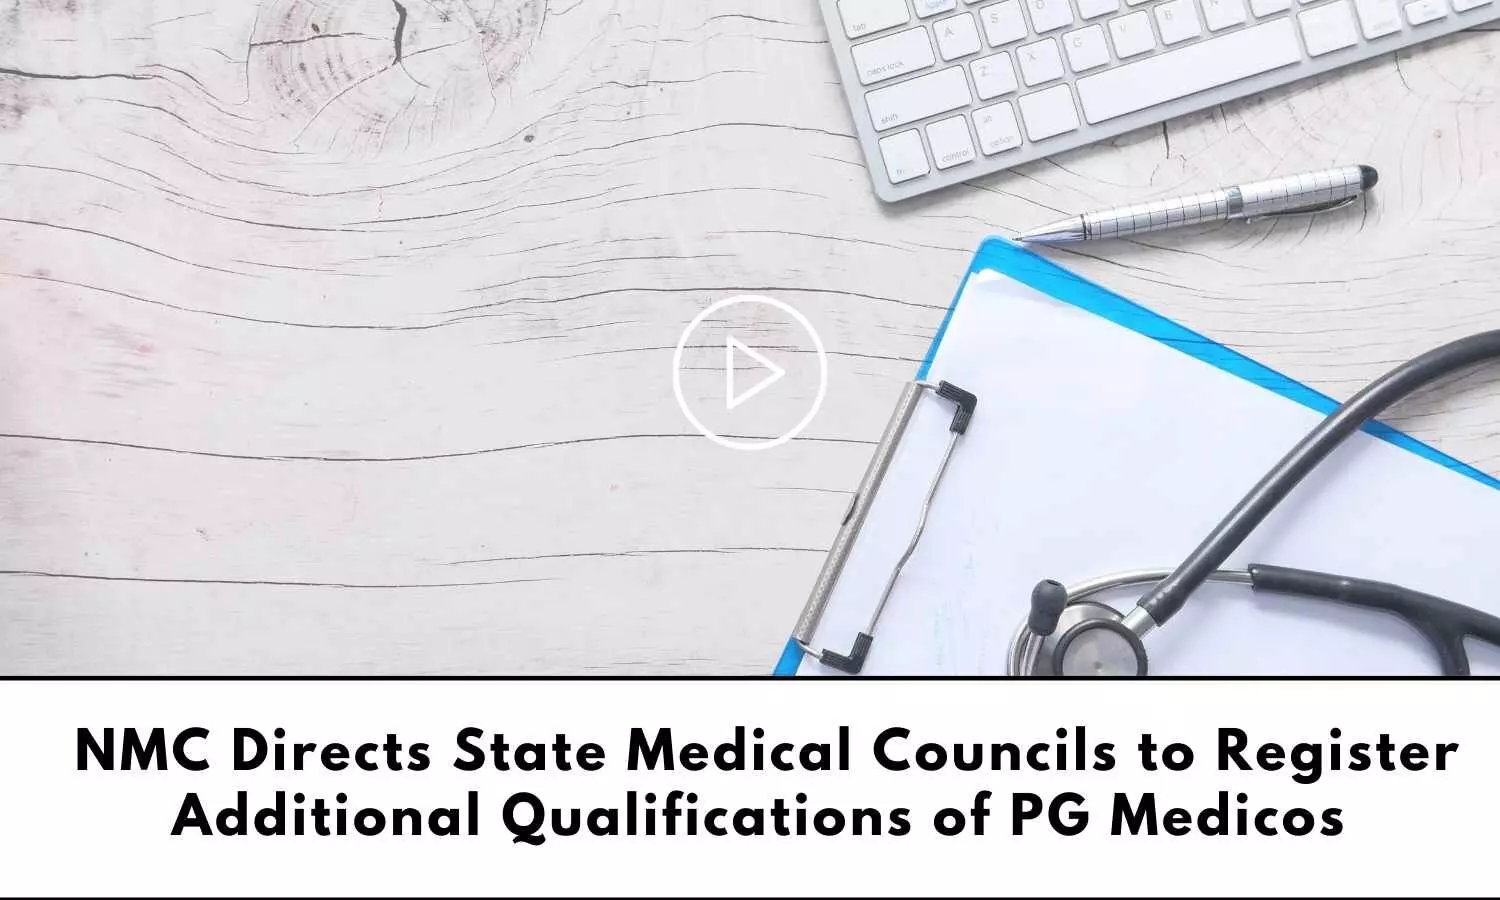 Register additional qualifications of PG medicos: NMC directs State Medical Councils